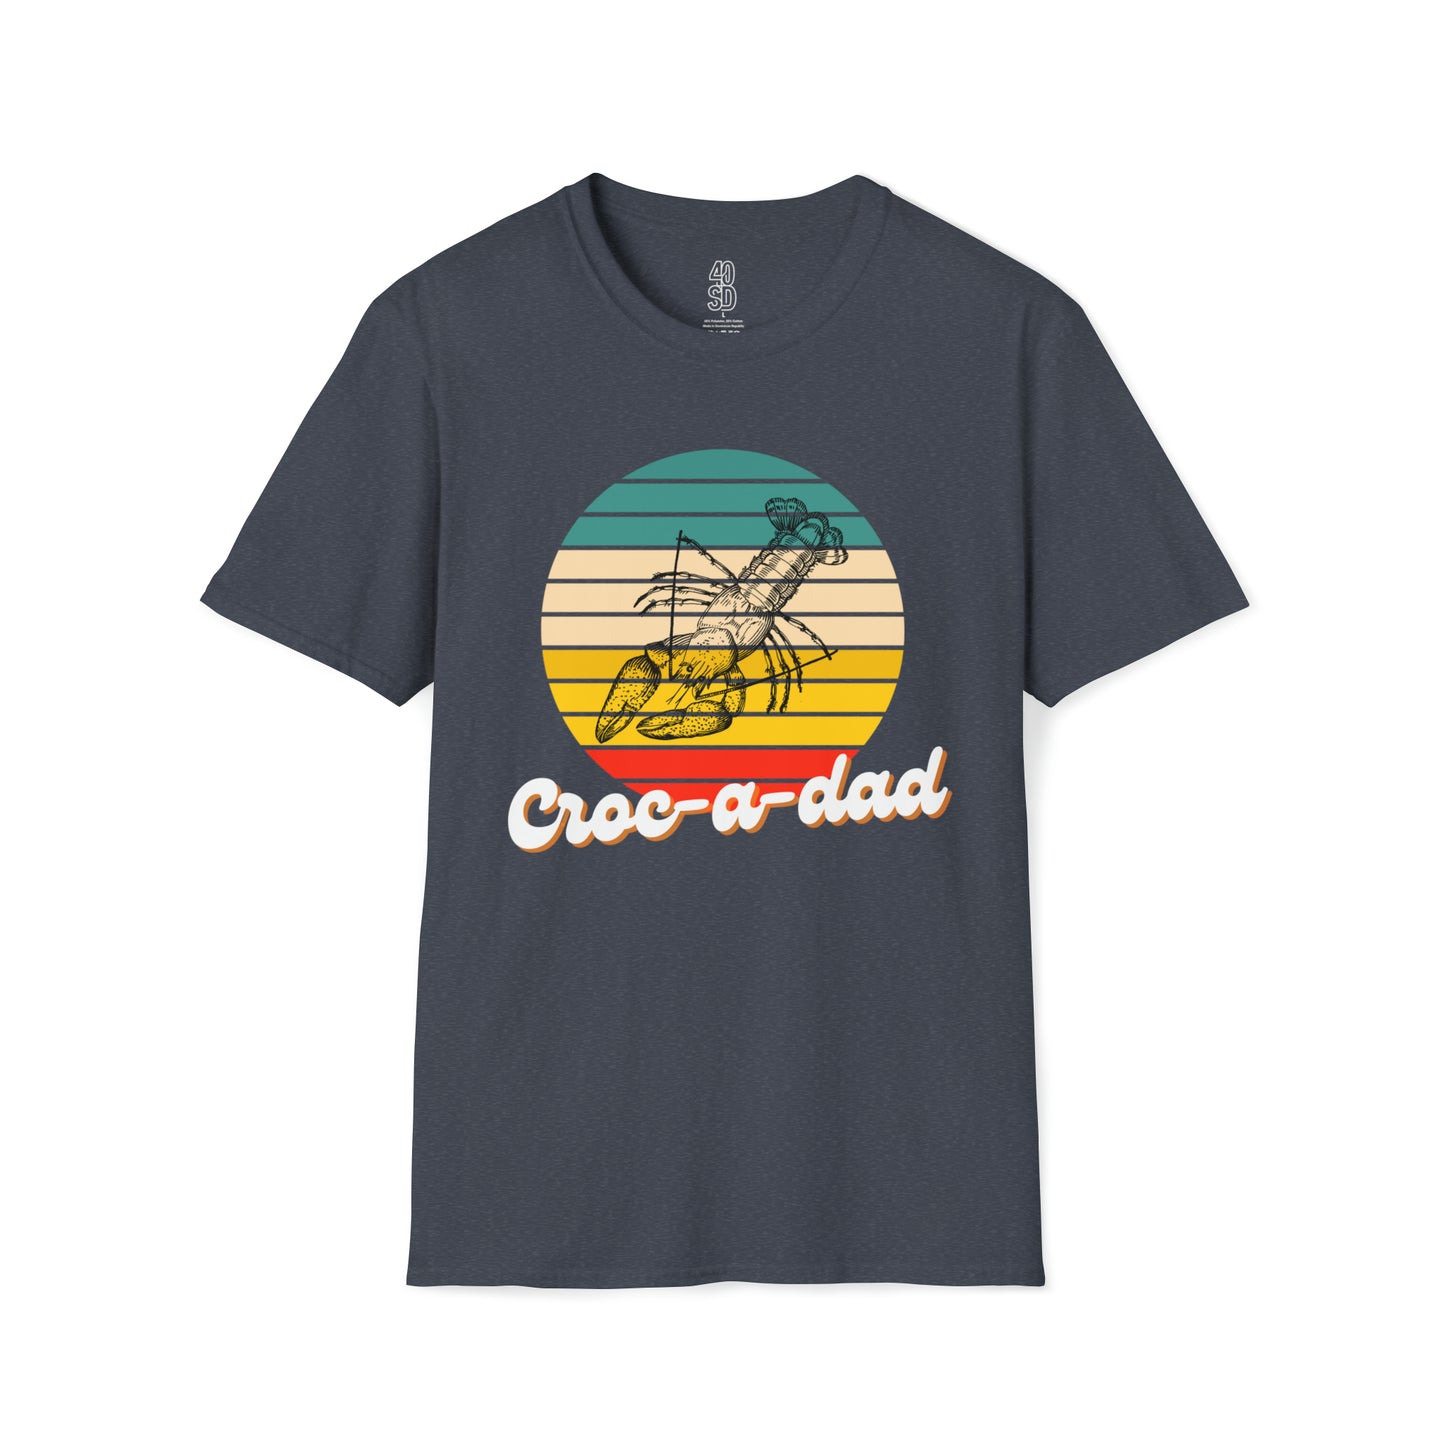 Croc-a-dad Unisex Softstyle T-Shirt